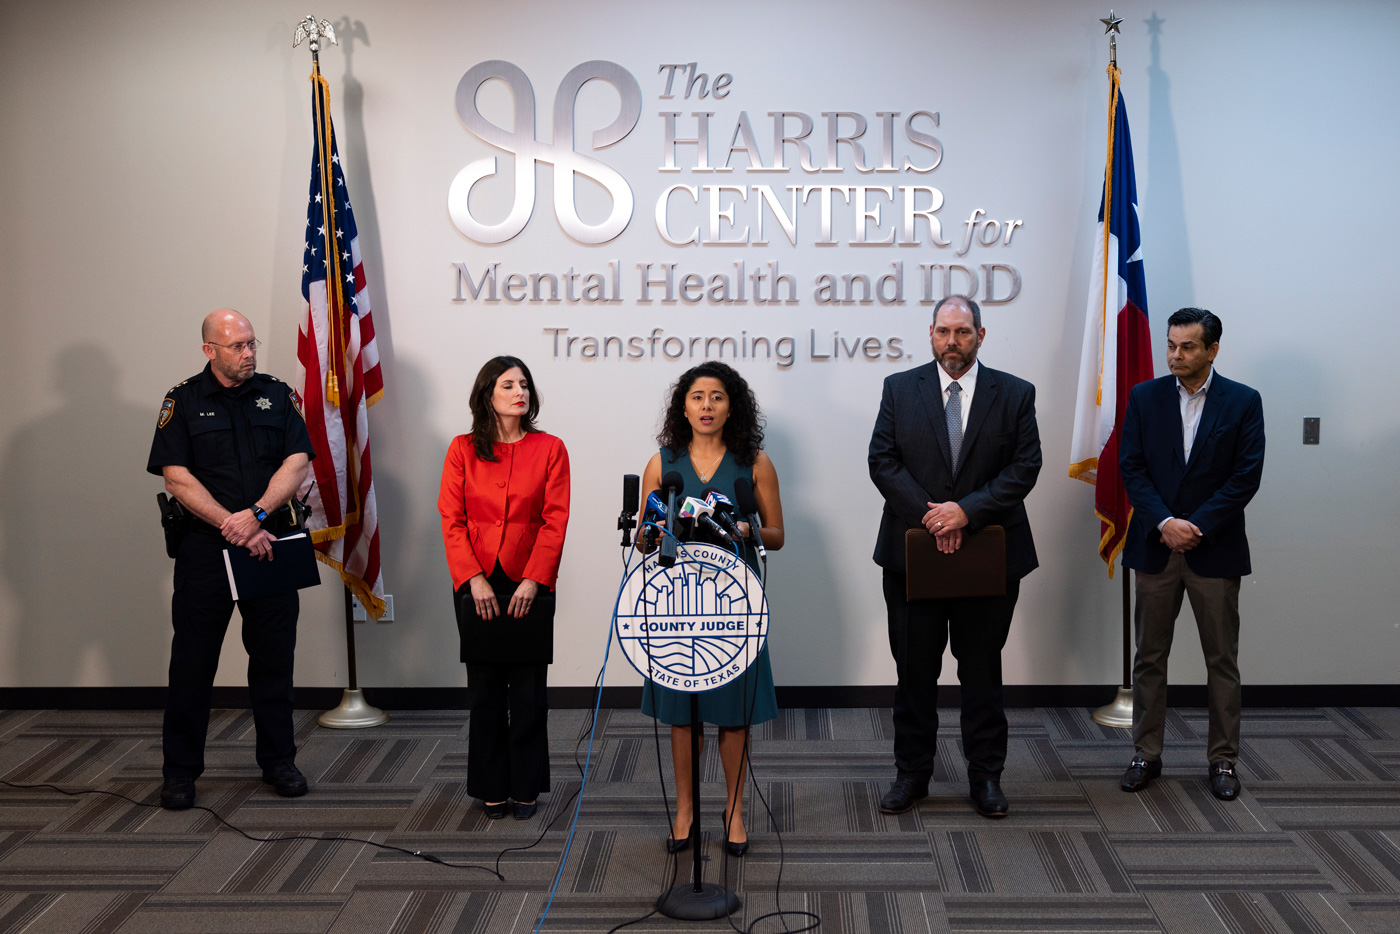 Harris County Judge Lina Hidalgo holds a news conference at the Harris Center for Mental Health and IDD, Feb. 9, 2023, in Houston.